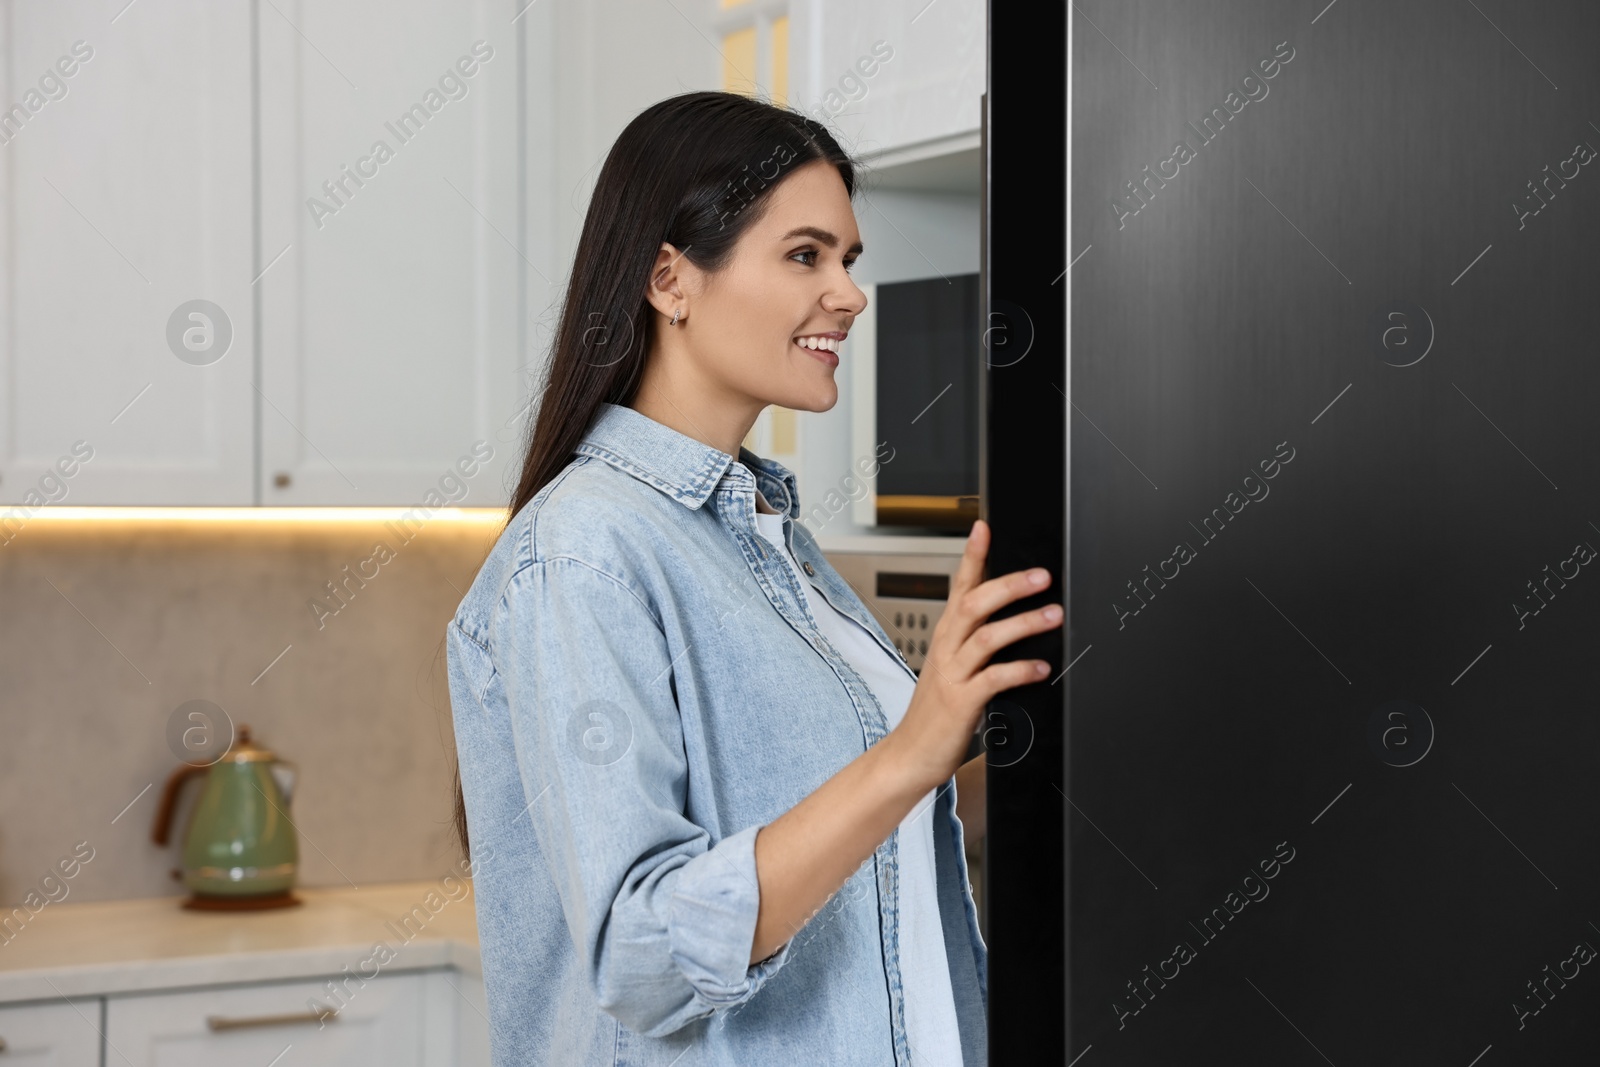 Photo of Young woman near modern refrigerator in kitchen